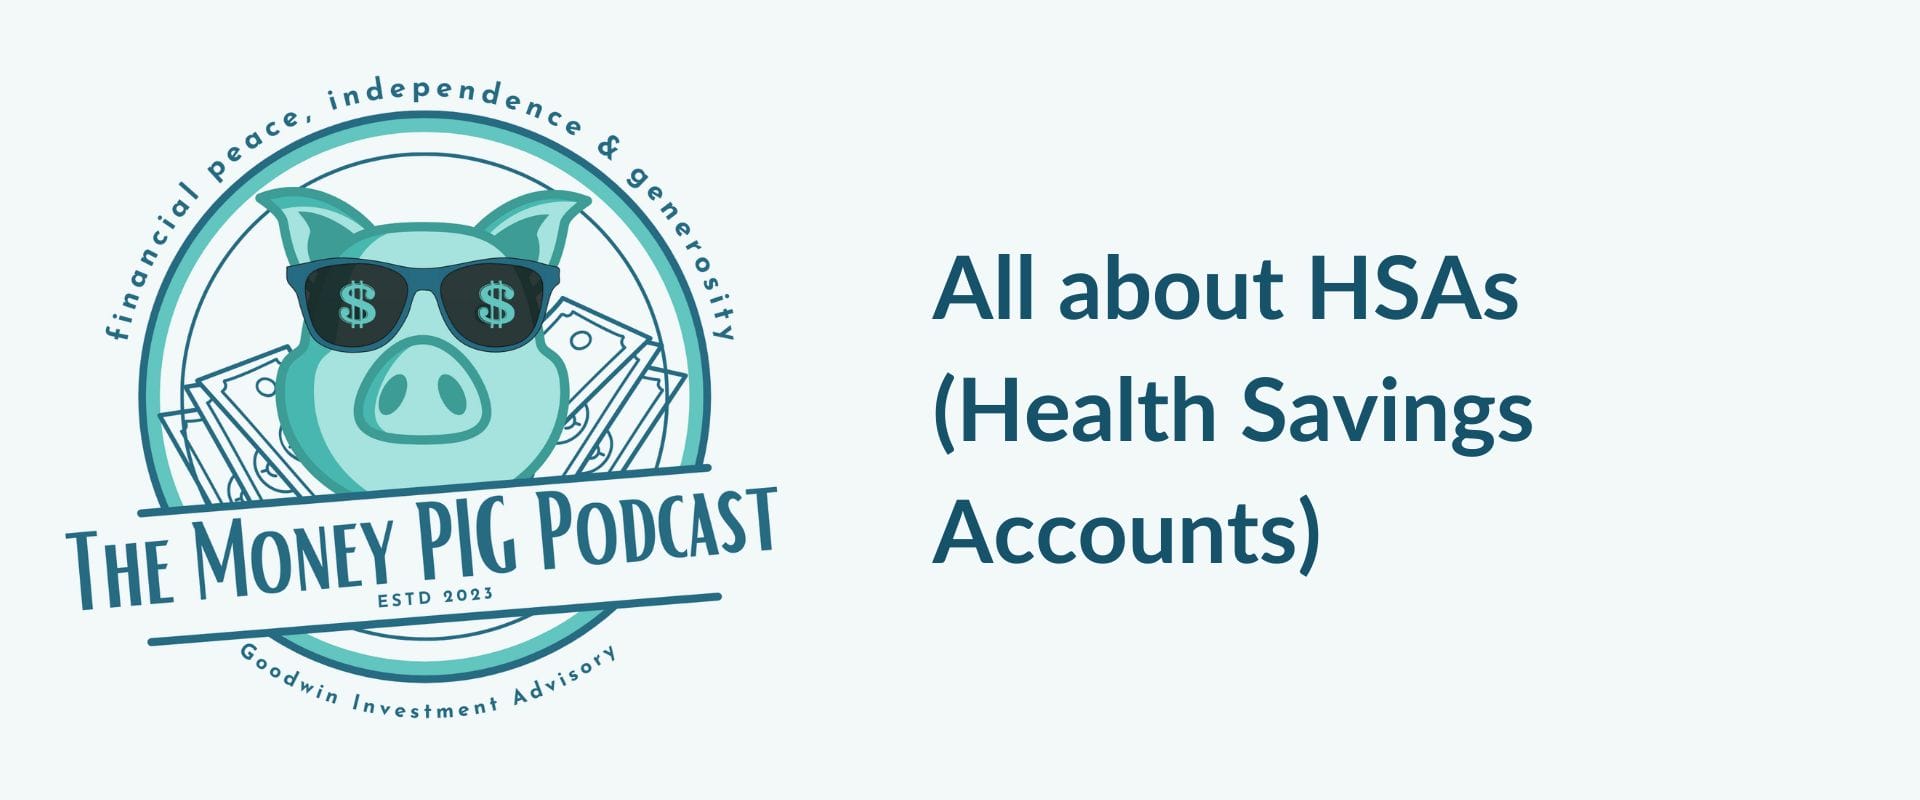 All about HSAs (Health Savings Accounts)